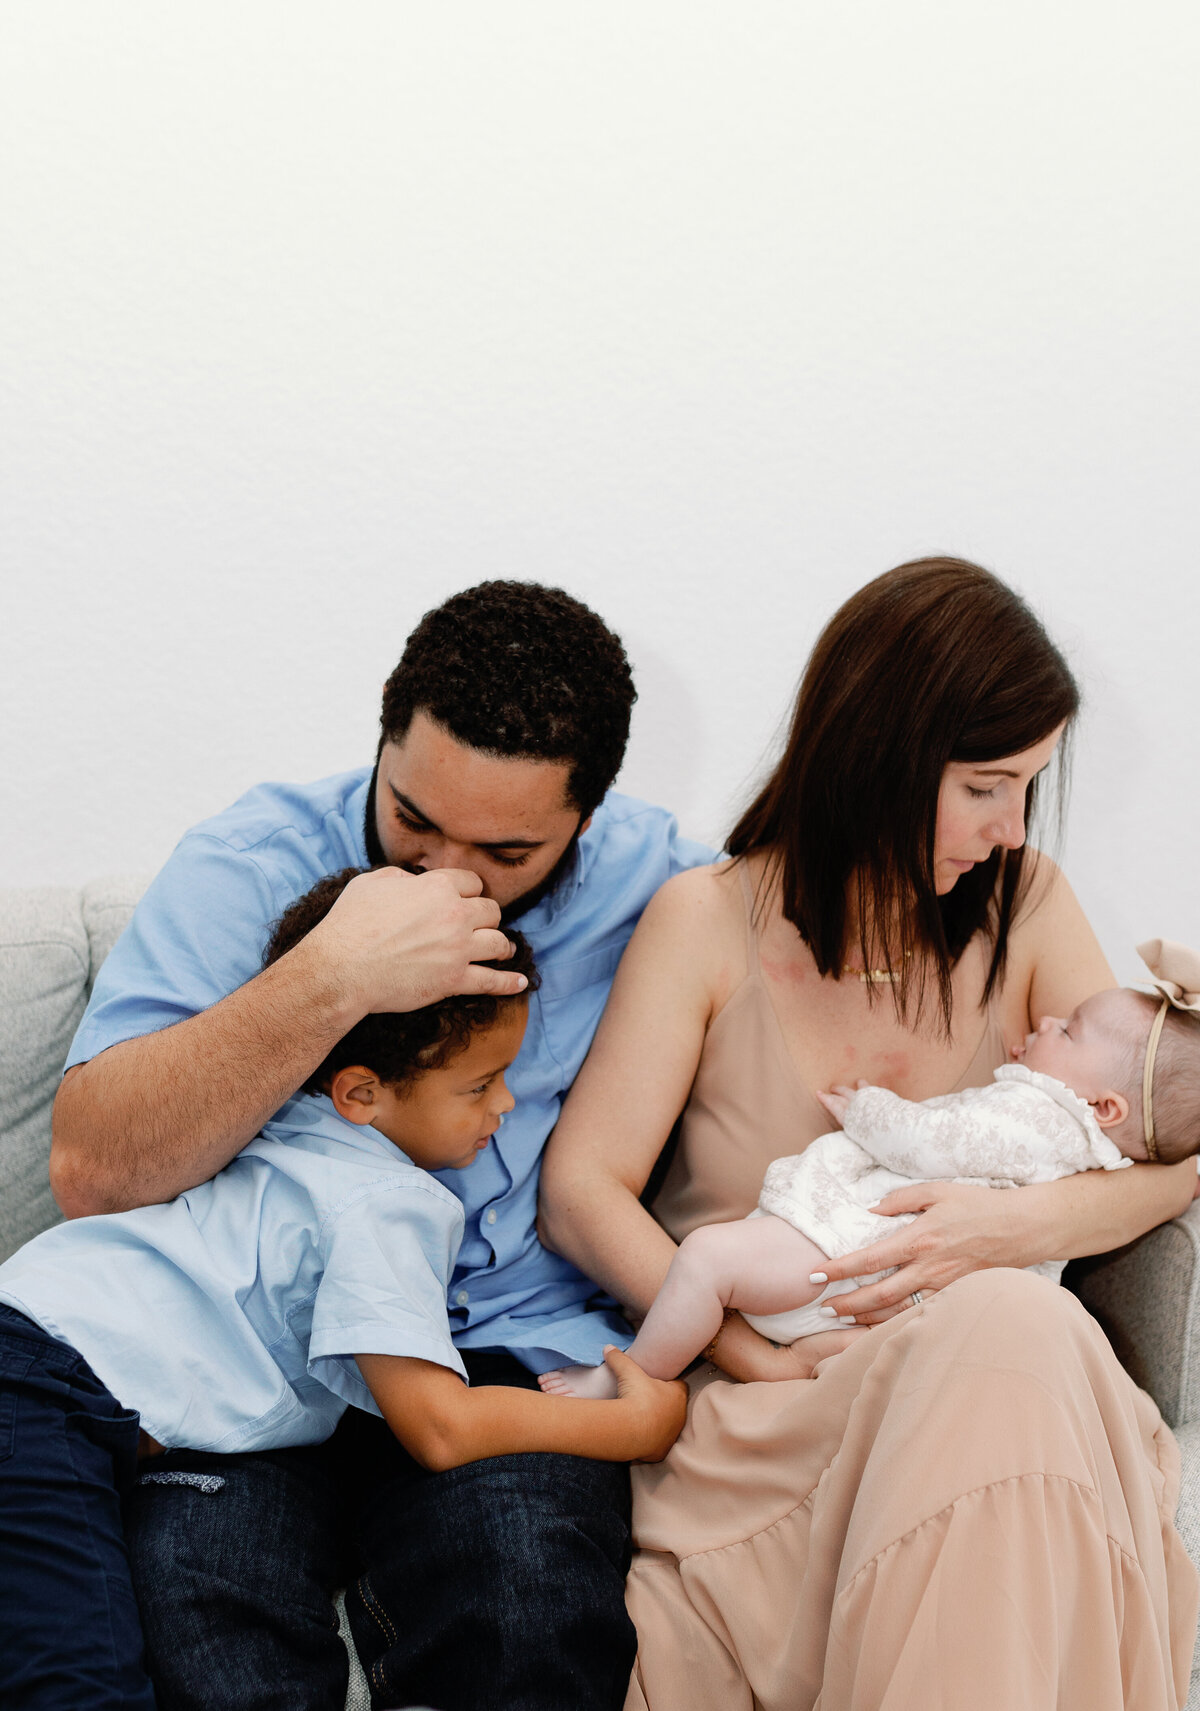 Lifestyle Newborn Photography session in South Florida, Maria Cordova Photography